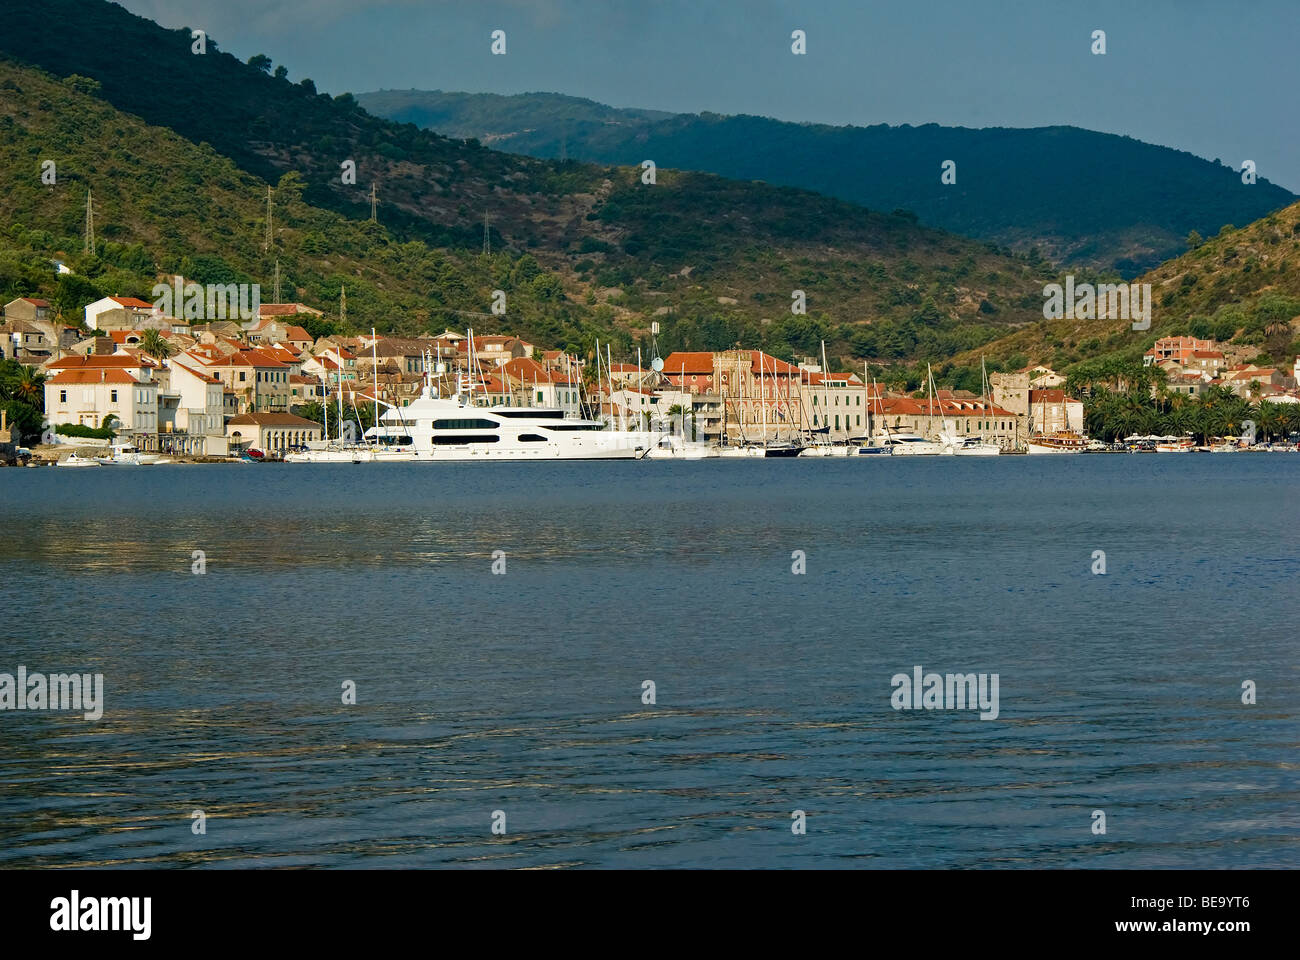 Croatia; Hrvartska; Kroatien, Central Croatia, Laka, charter sail and power yacht tied up at water front of old town Stock Photo